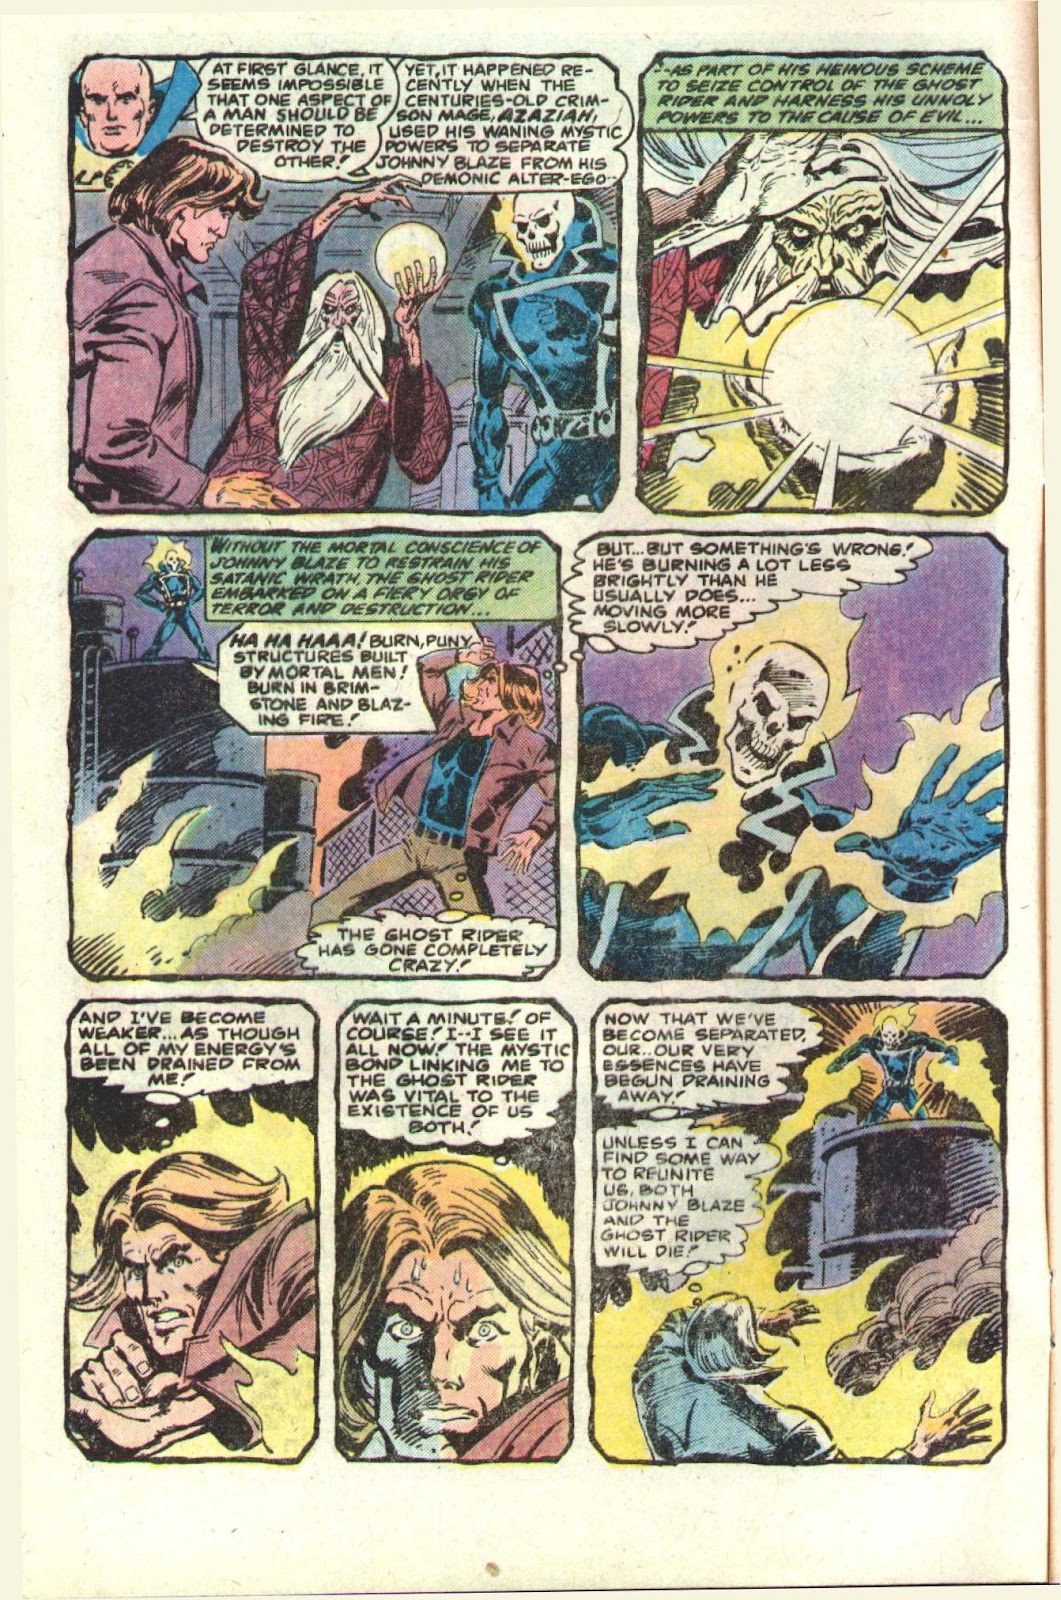 What If? (1977) issue 28 - Daredevil became an agent of SHIELD - Page 4